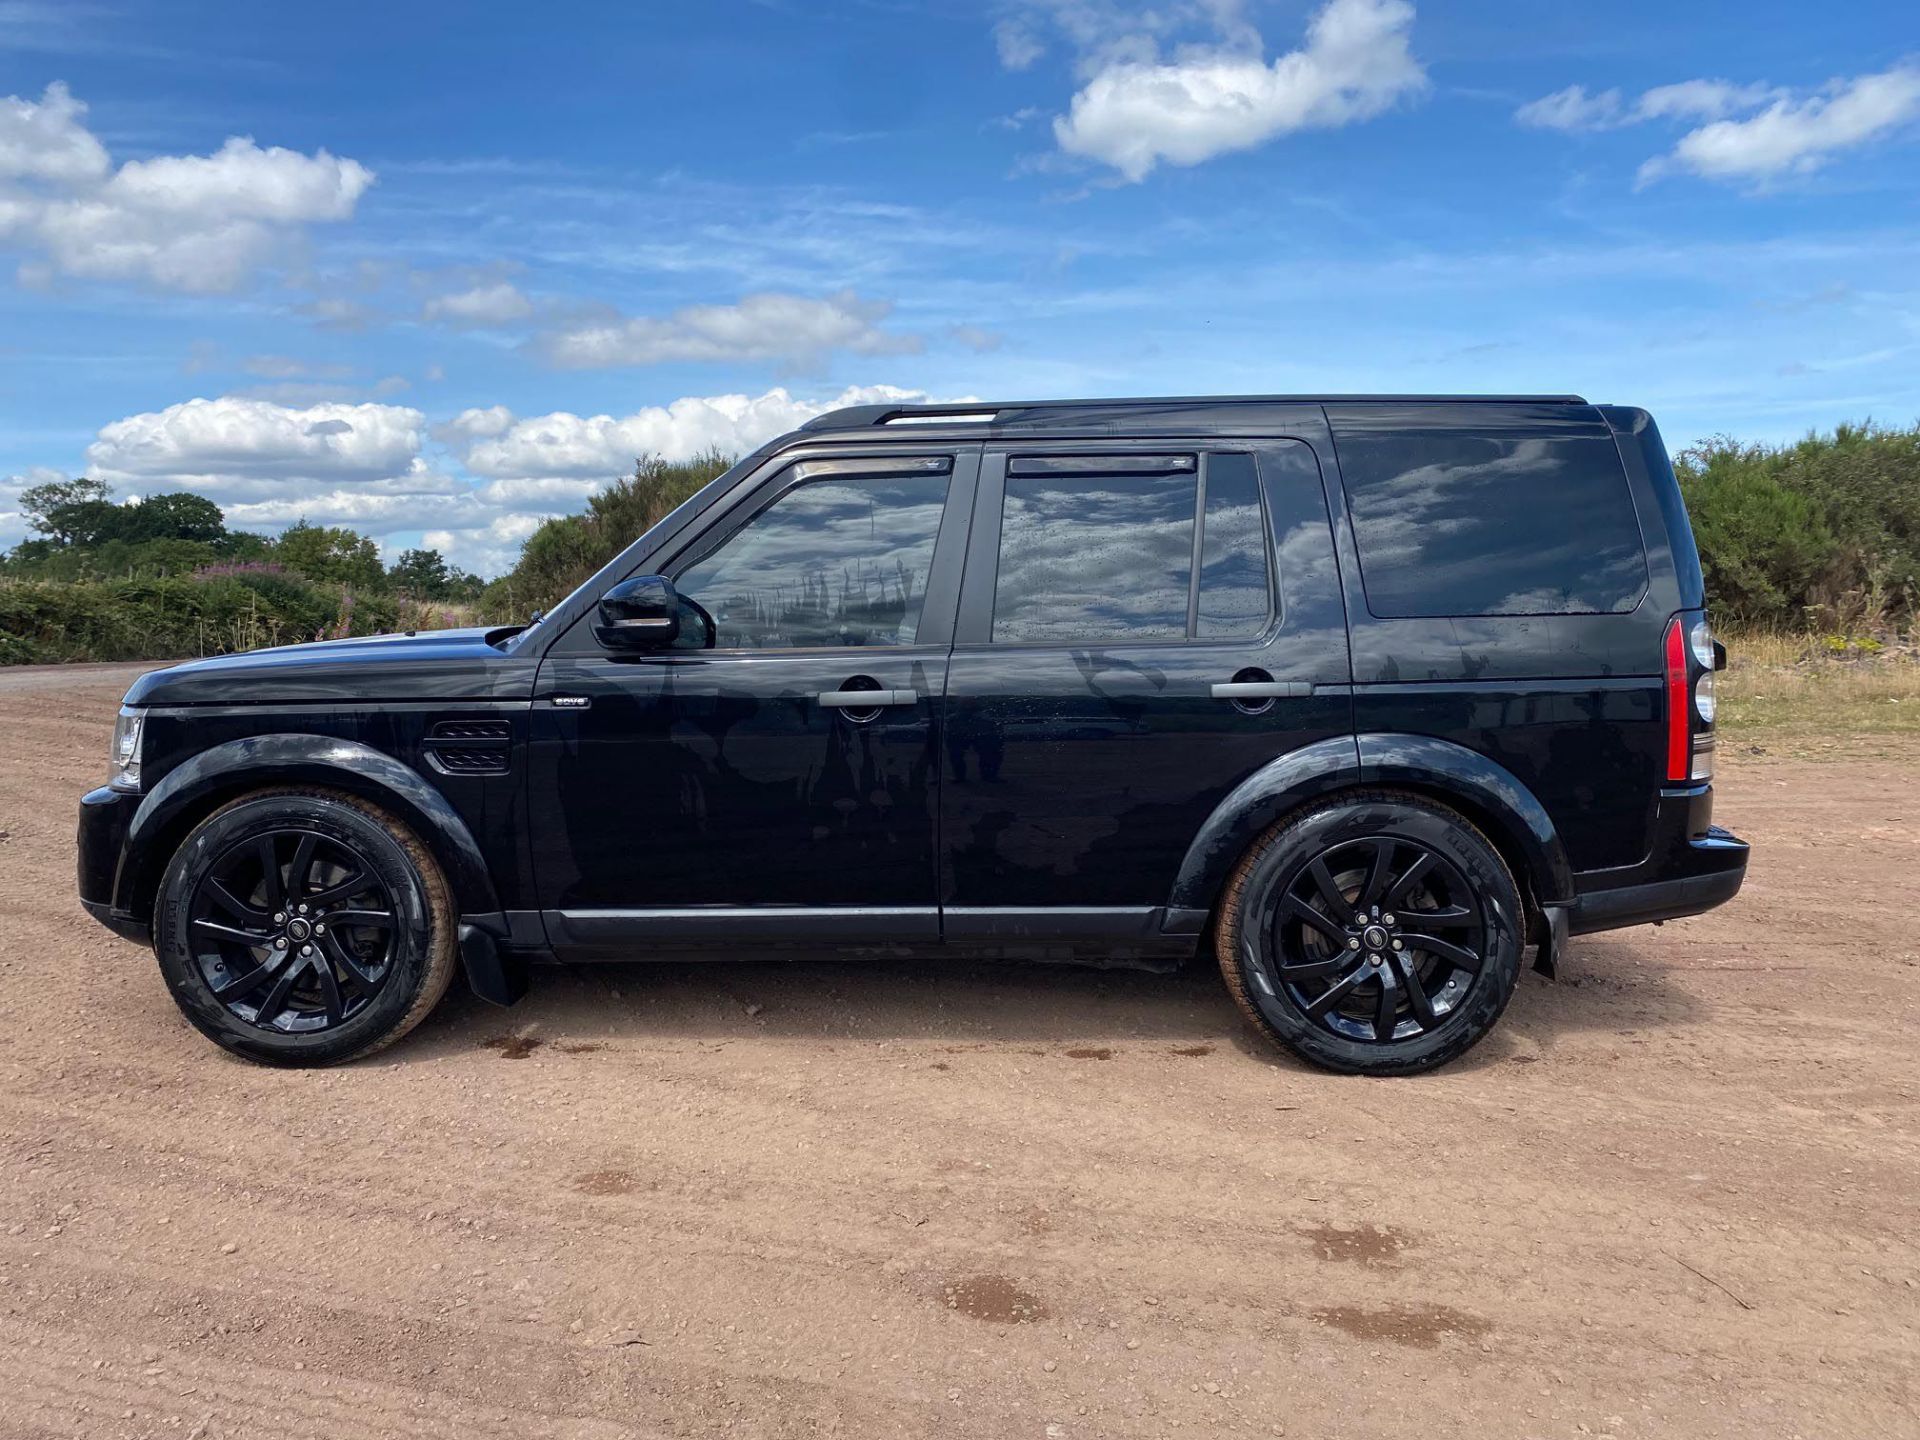 2015 LAND ROVER DISCOVERY XS SDV6 AUTO BLACK CONVERTED COMMERCIAL – WITH REAR SEAT CONVERSION - Image 6 of 13